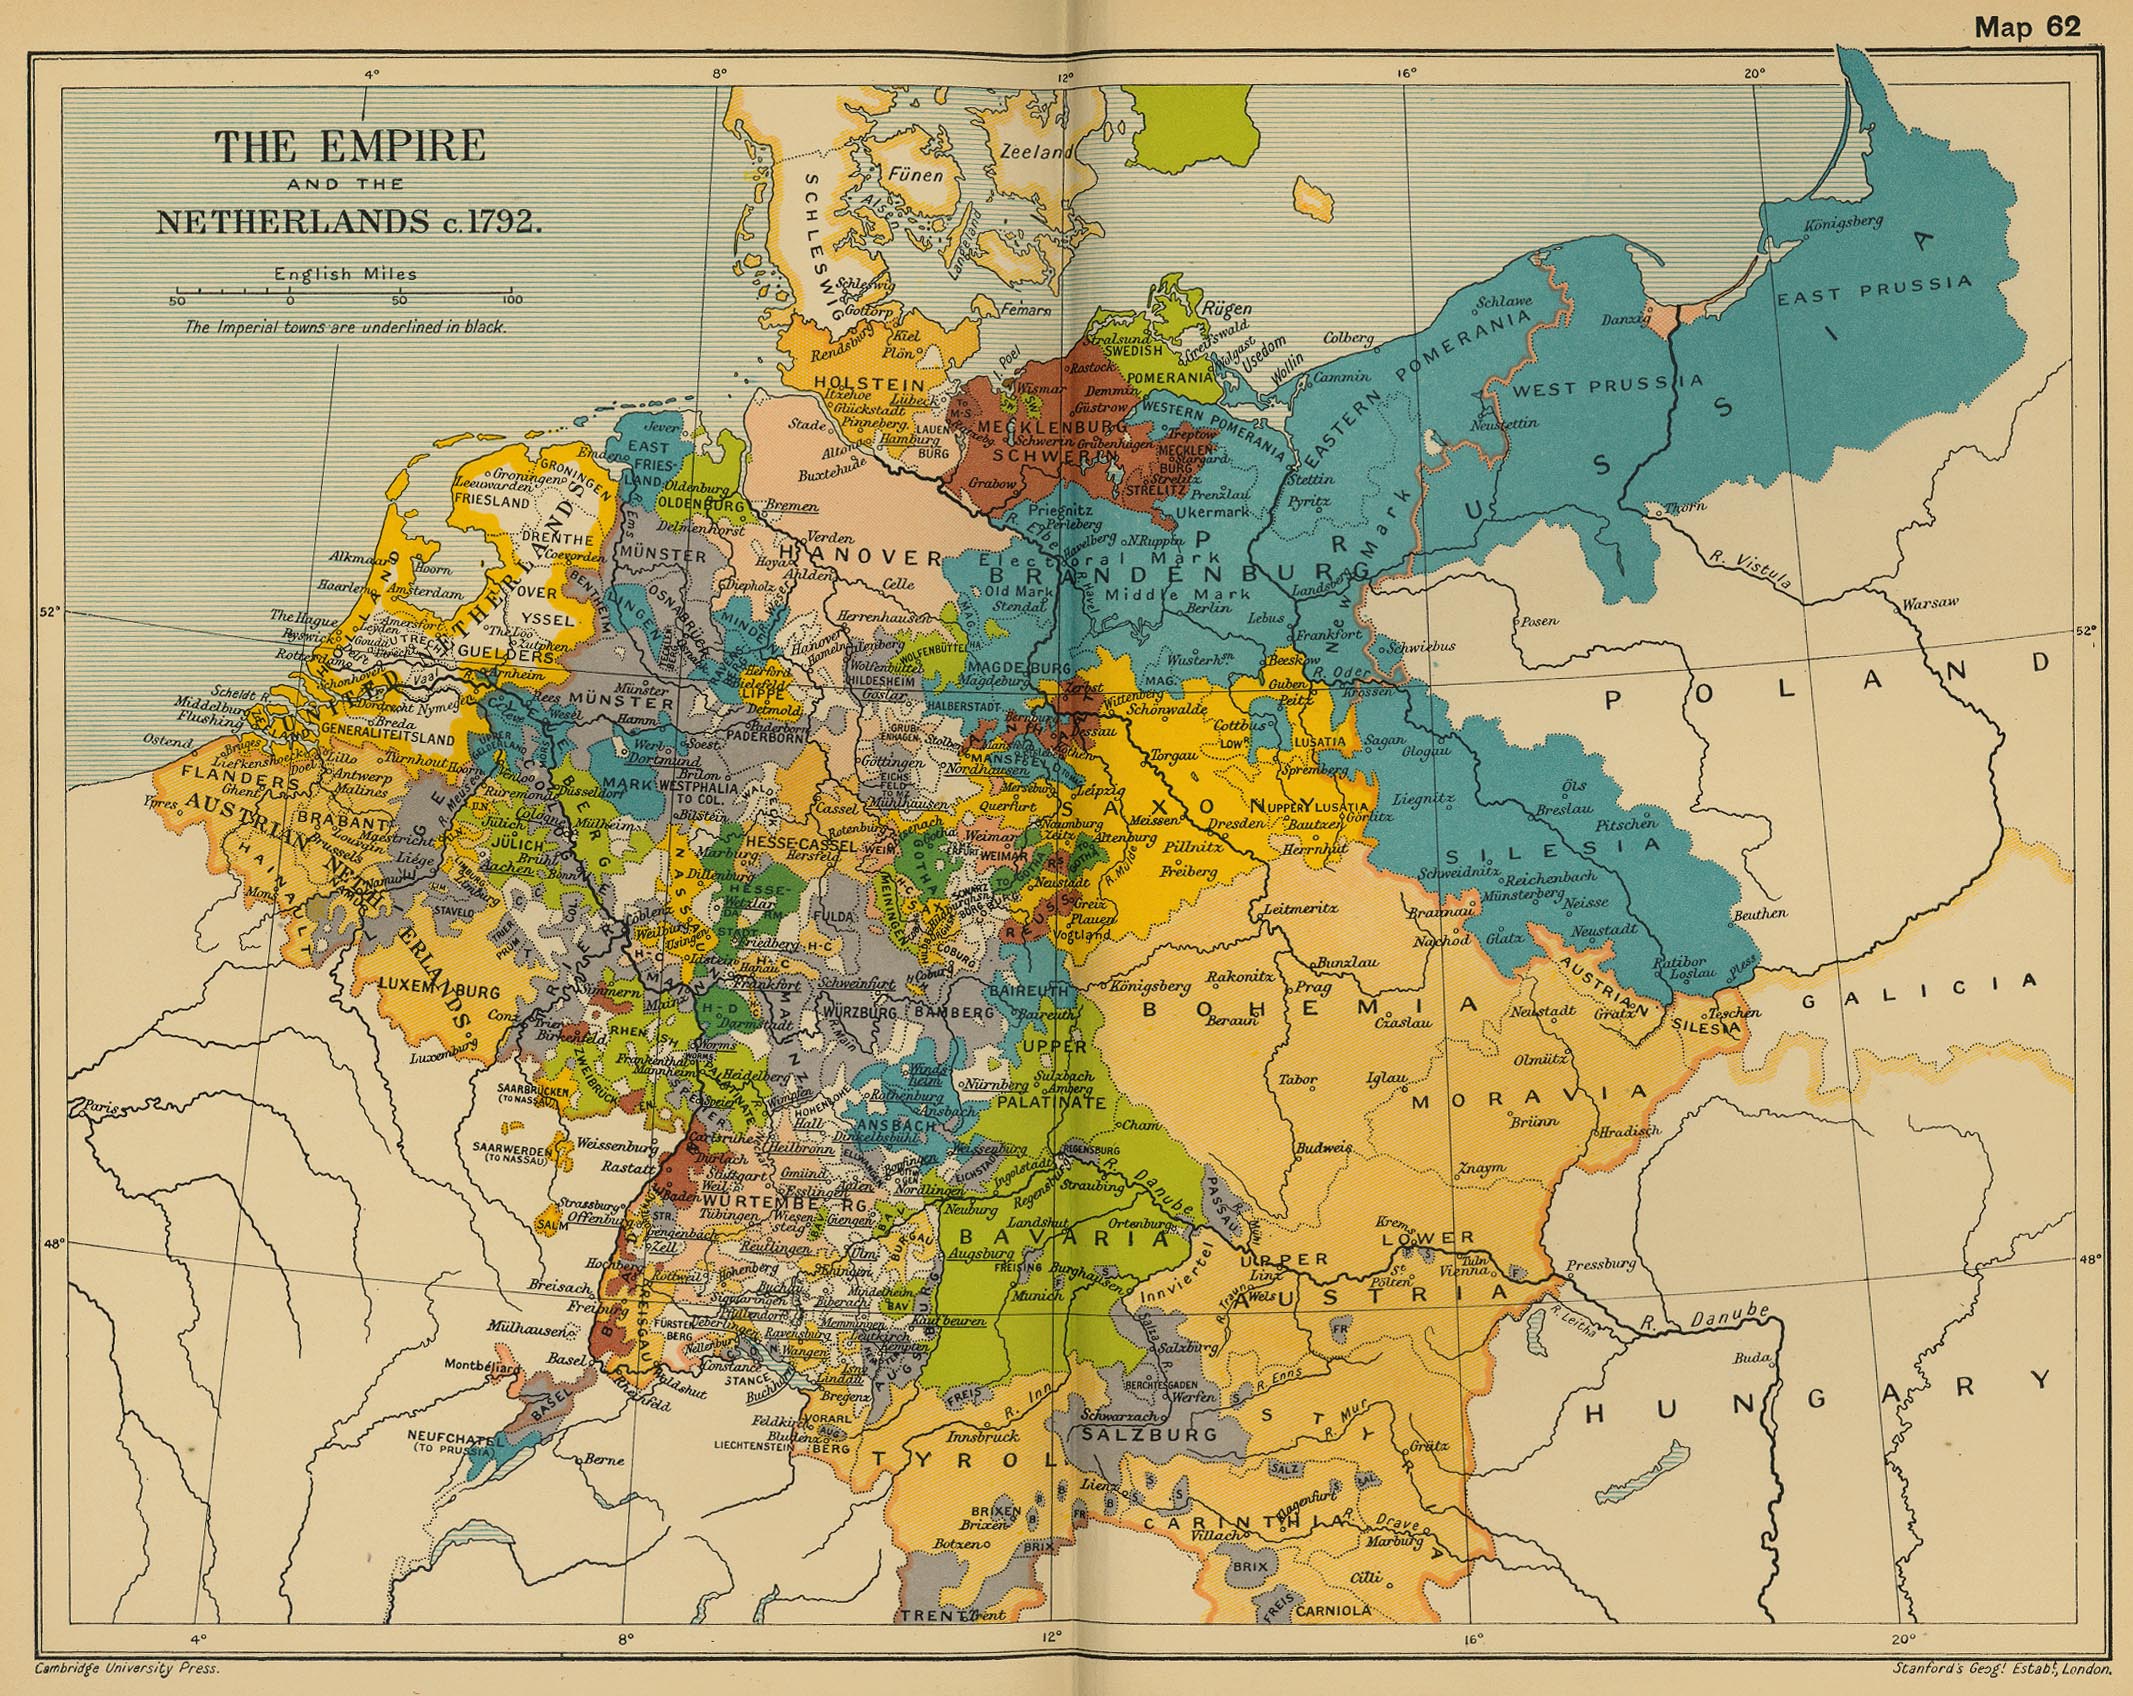 Map of Central Europe 1792: The Empire and the Netherlands